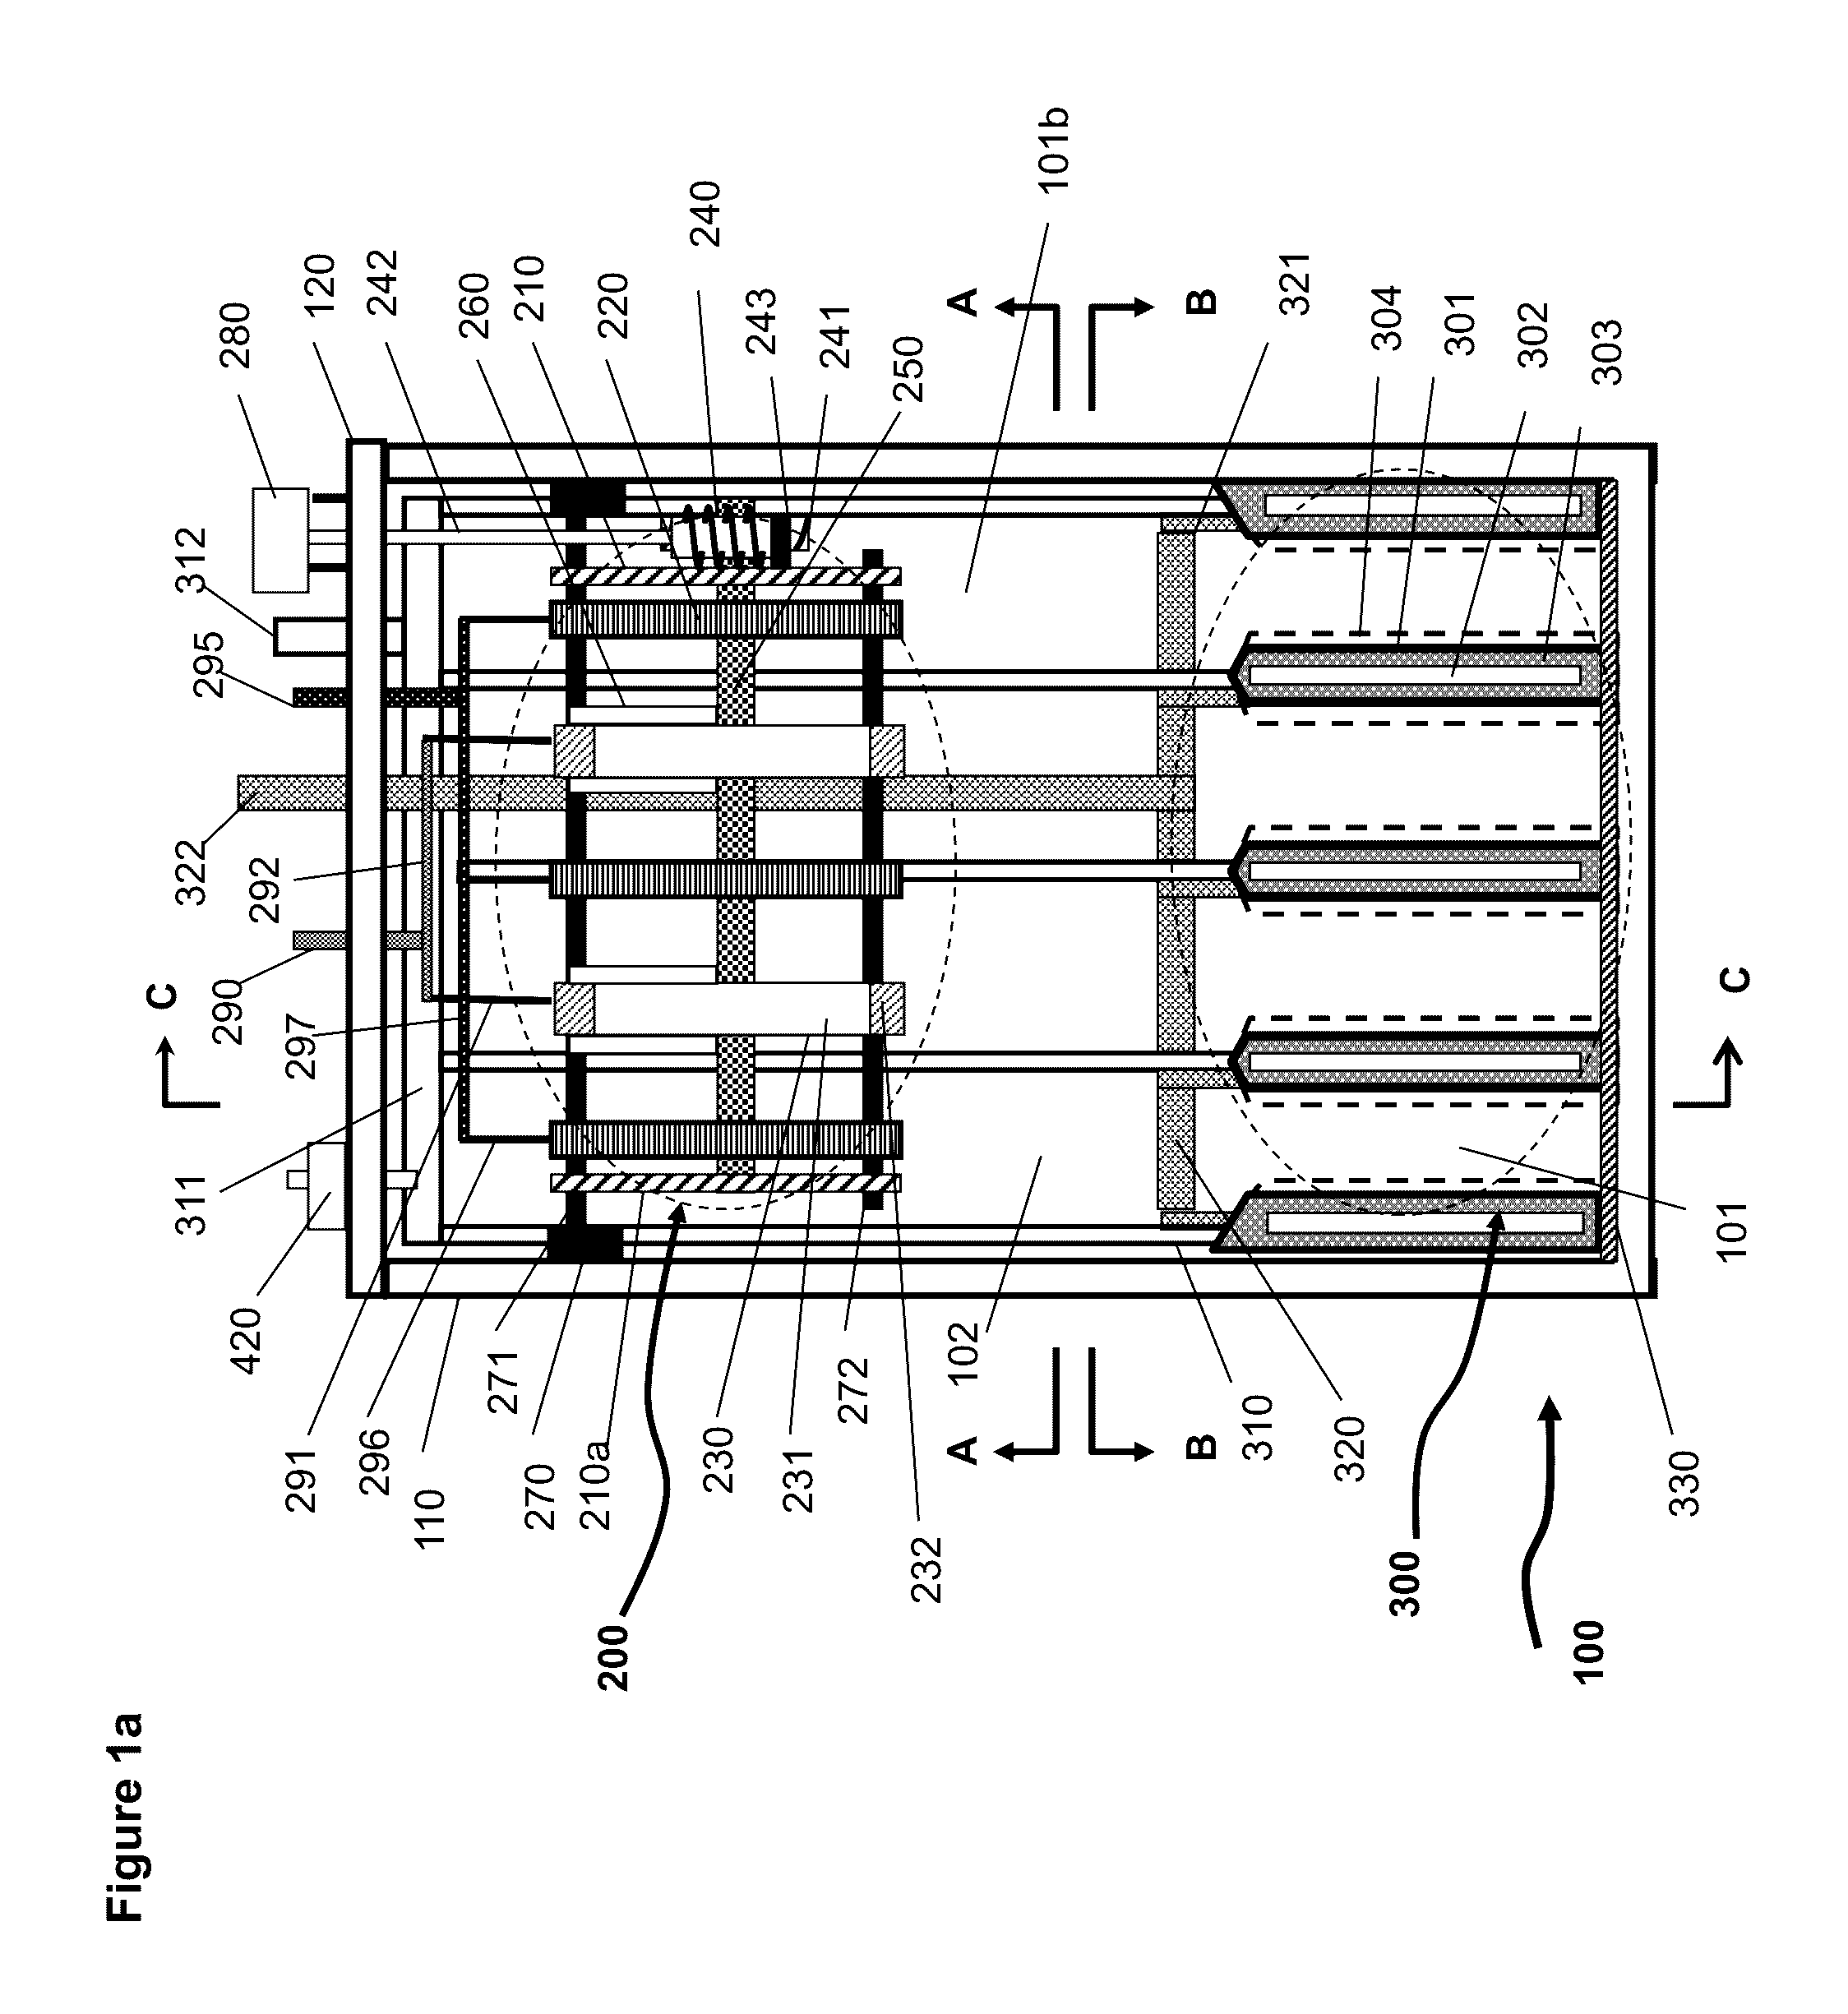 Electrochemical system for storing electricity in metals